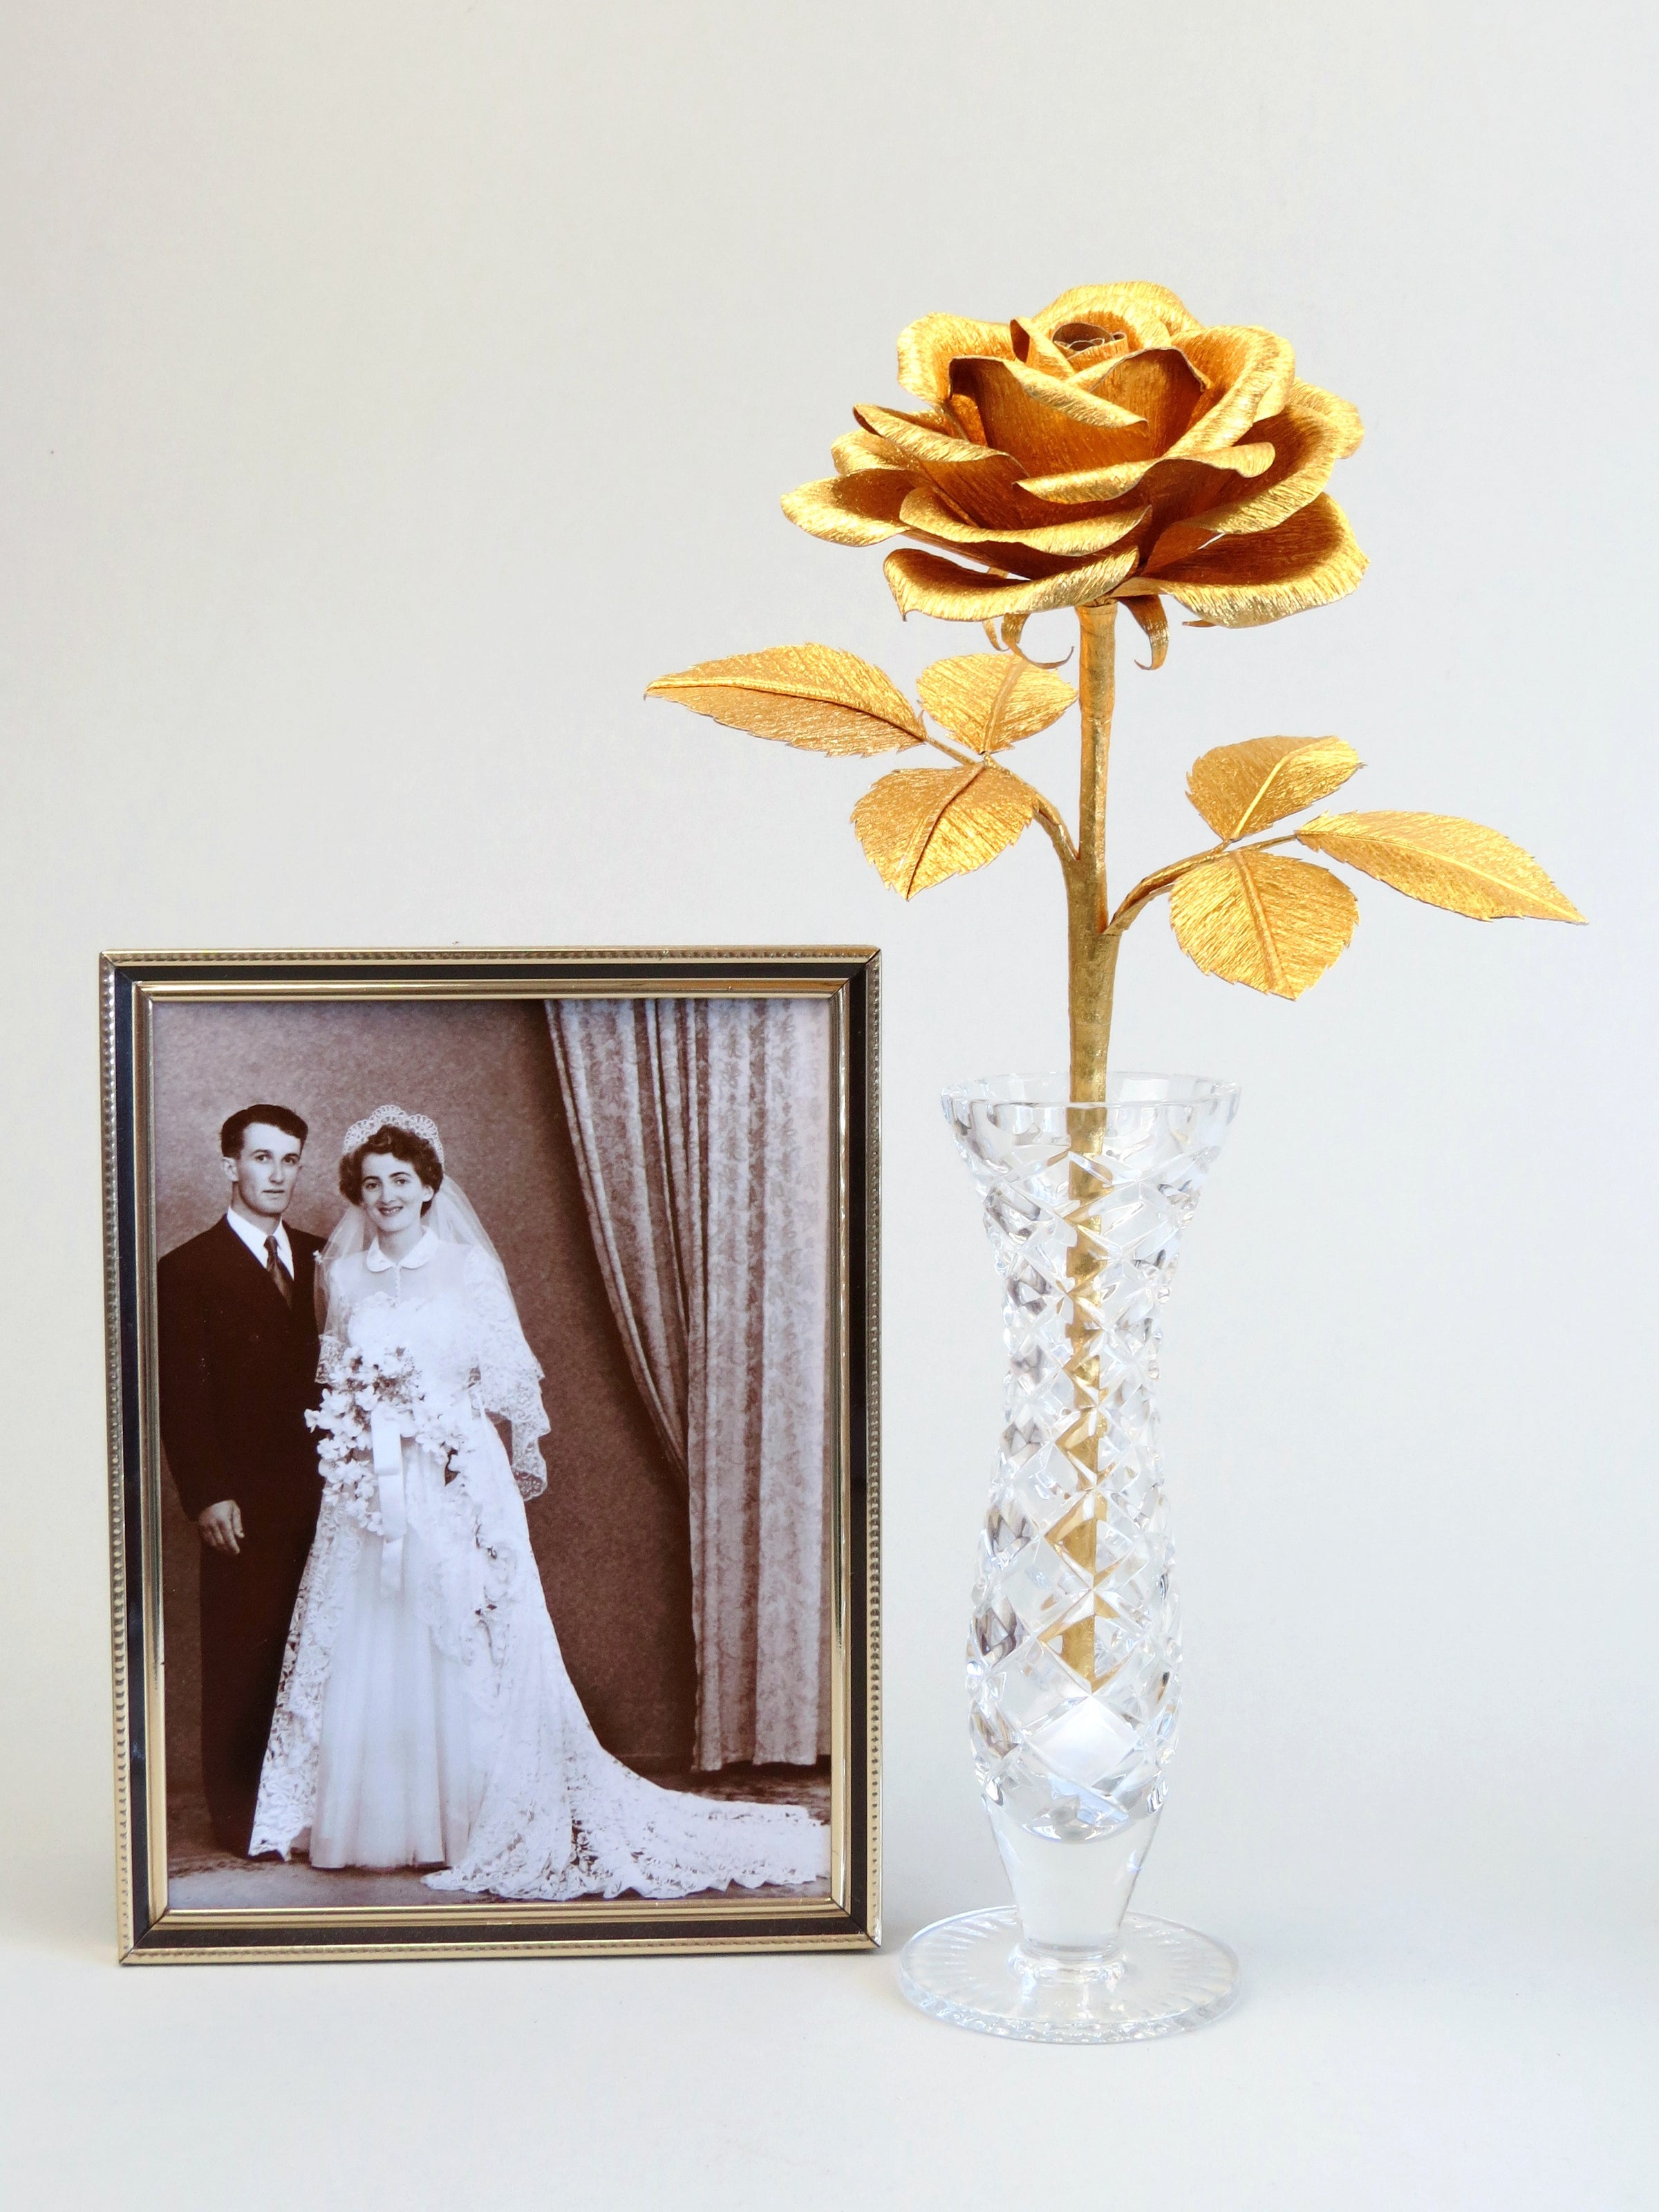 Gold crepe paper rose with six gold leaves standing in a slender glass vase with a thin gold framed sepia wedding photo of a happy vintage bride and groom standing to the left of the vase